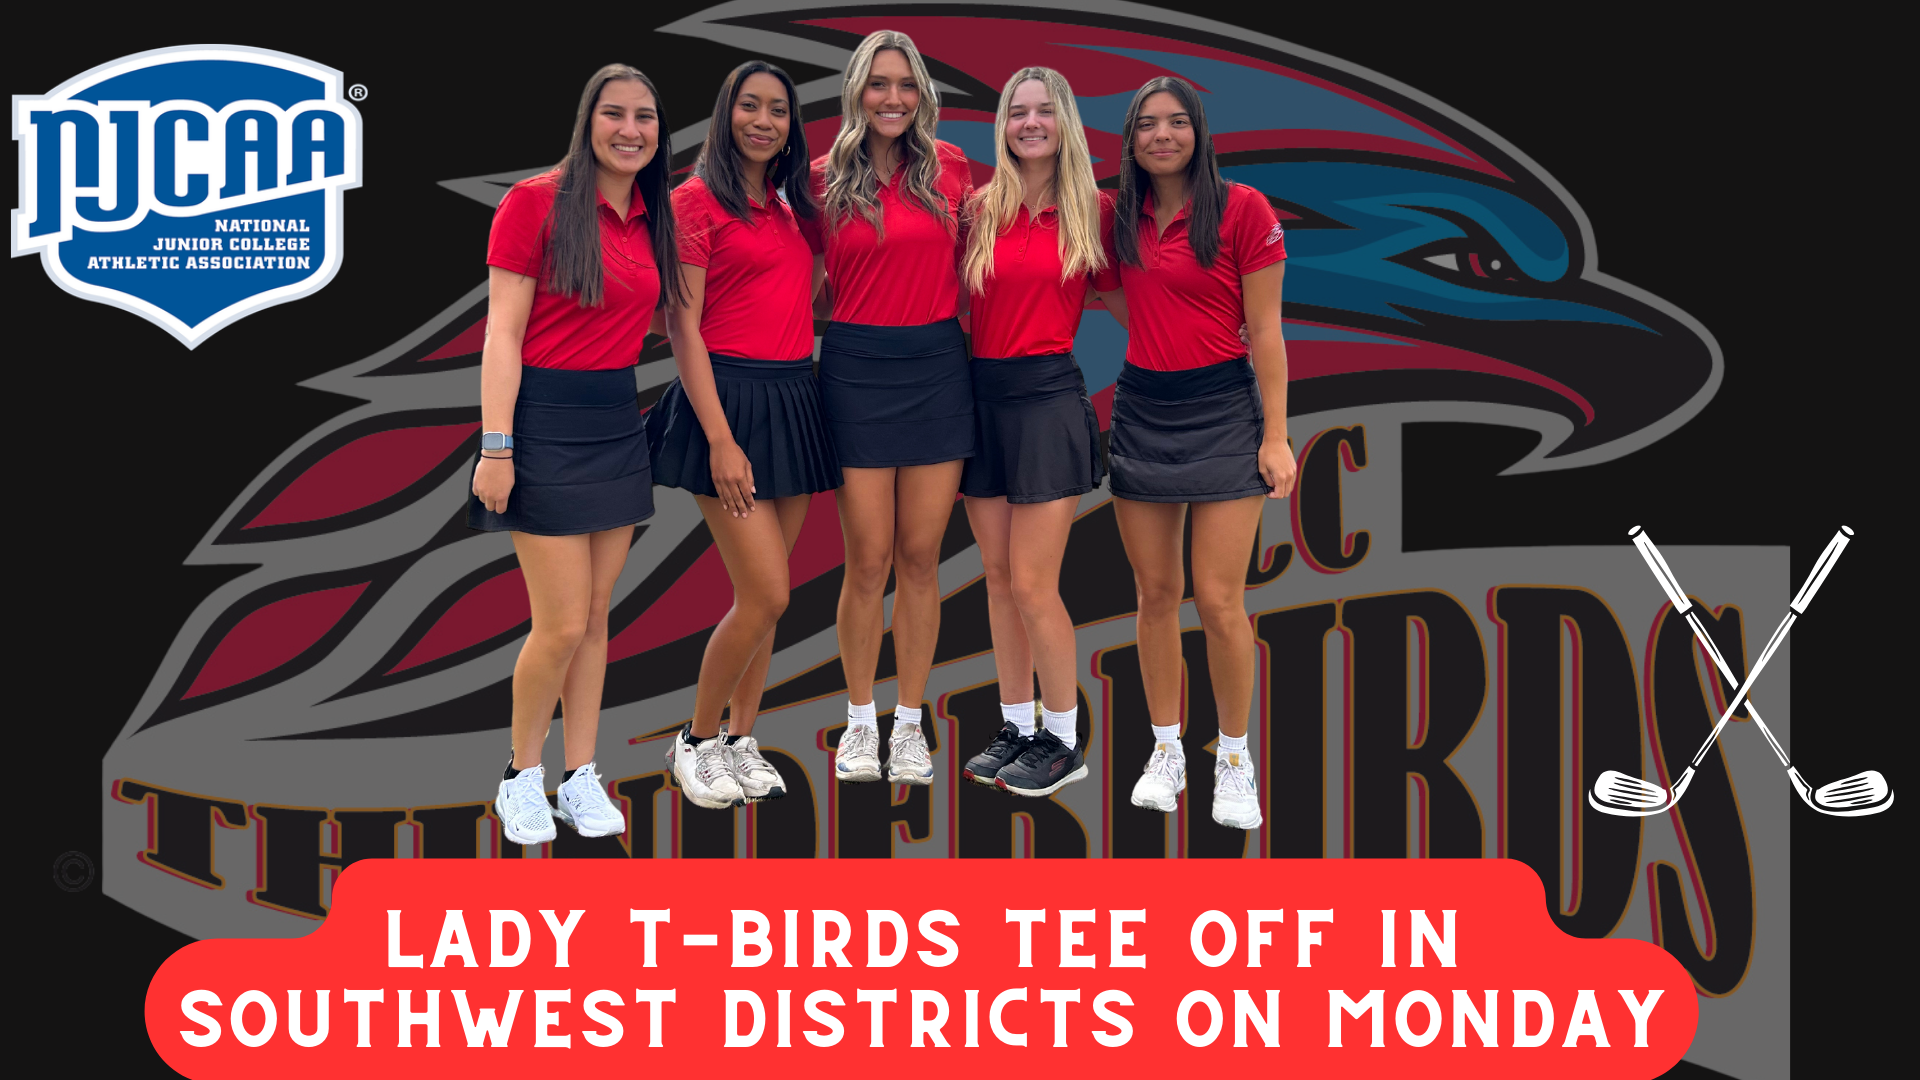 Lady T-Birds trail going into final round at CGCC Invite